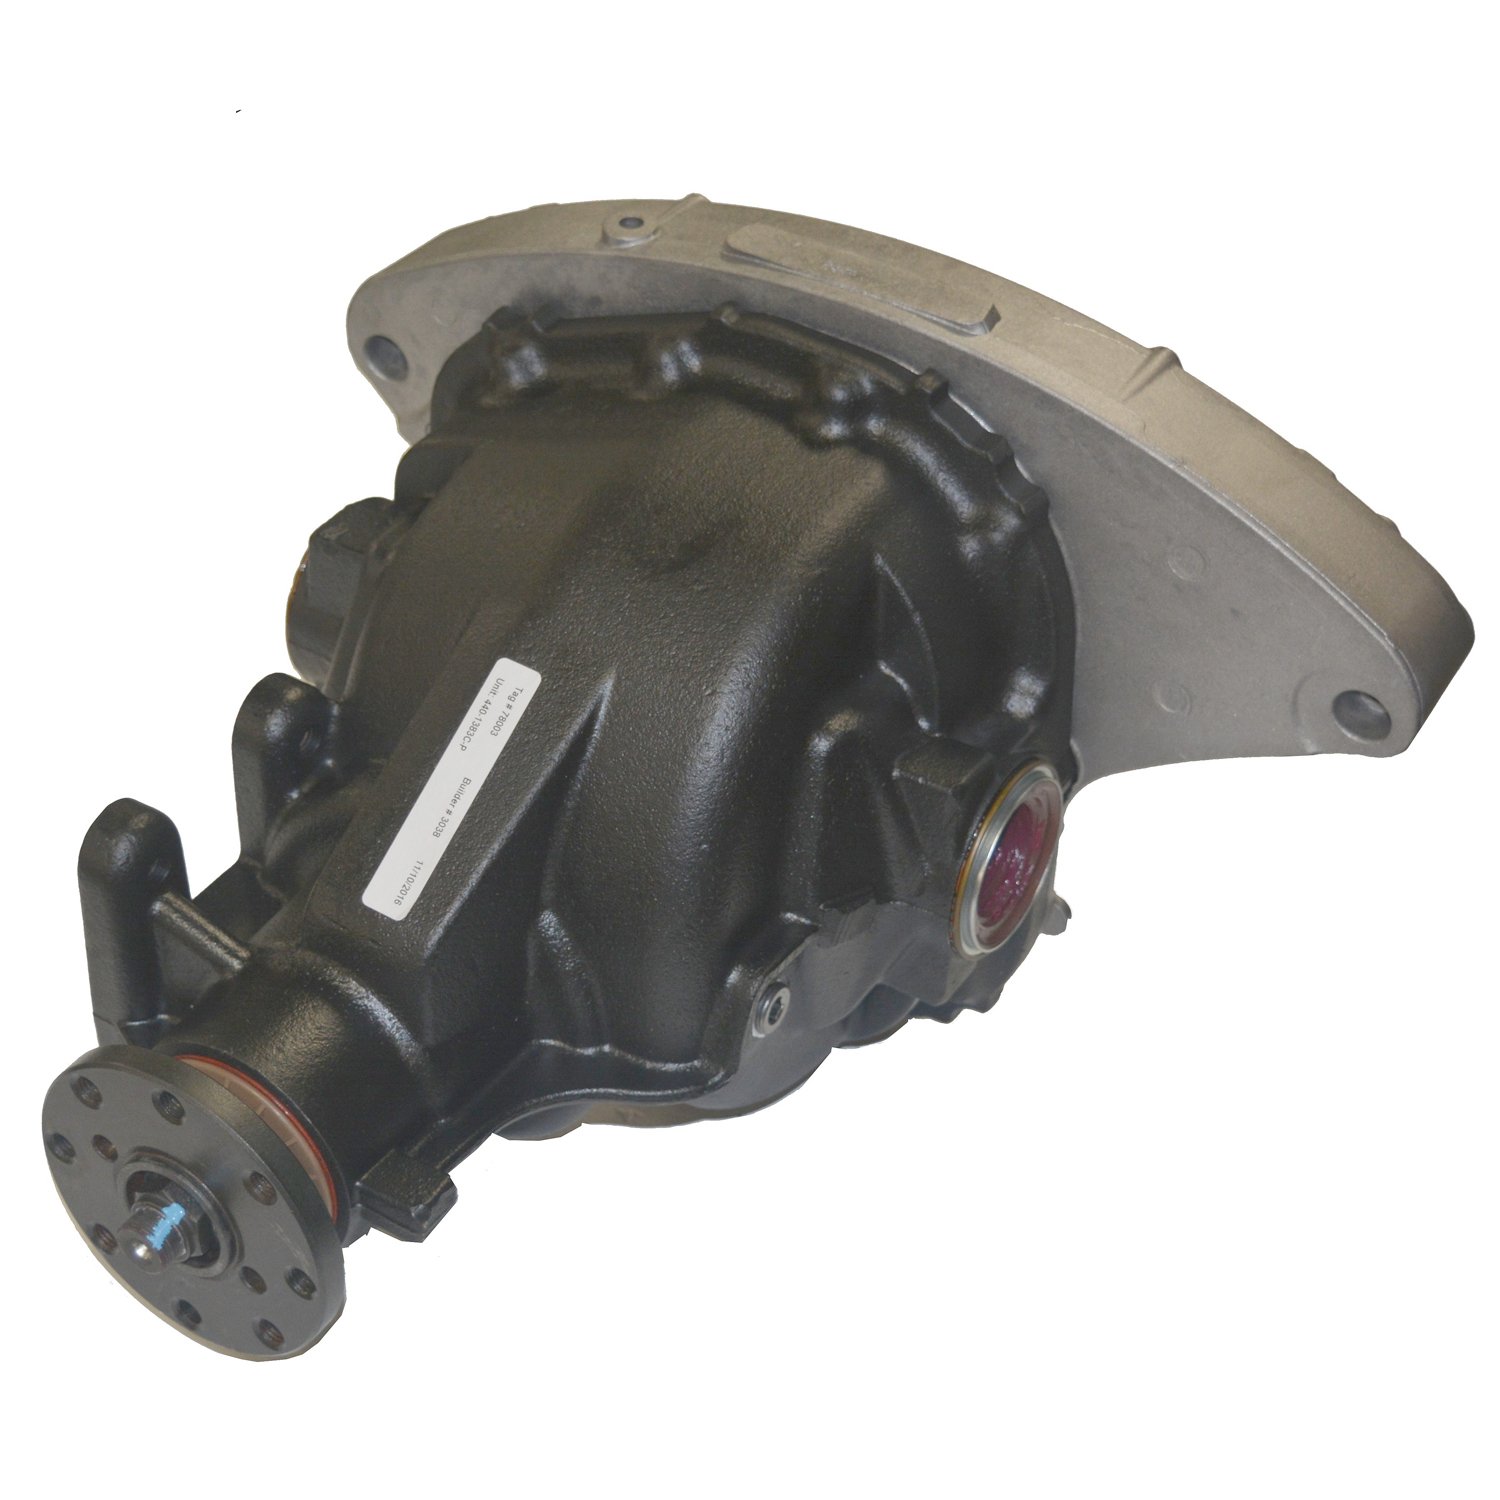 Remanufactured Axle Assembly for 9.75IRS 2005 Expedition 3.31 , Posi LSD